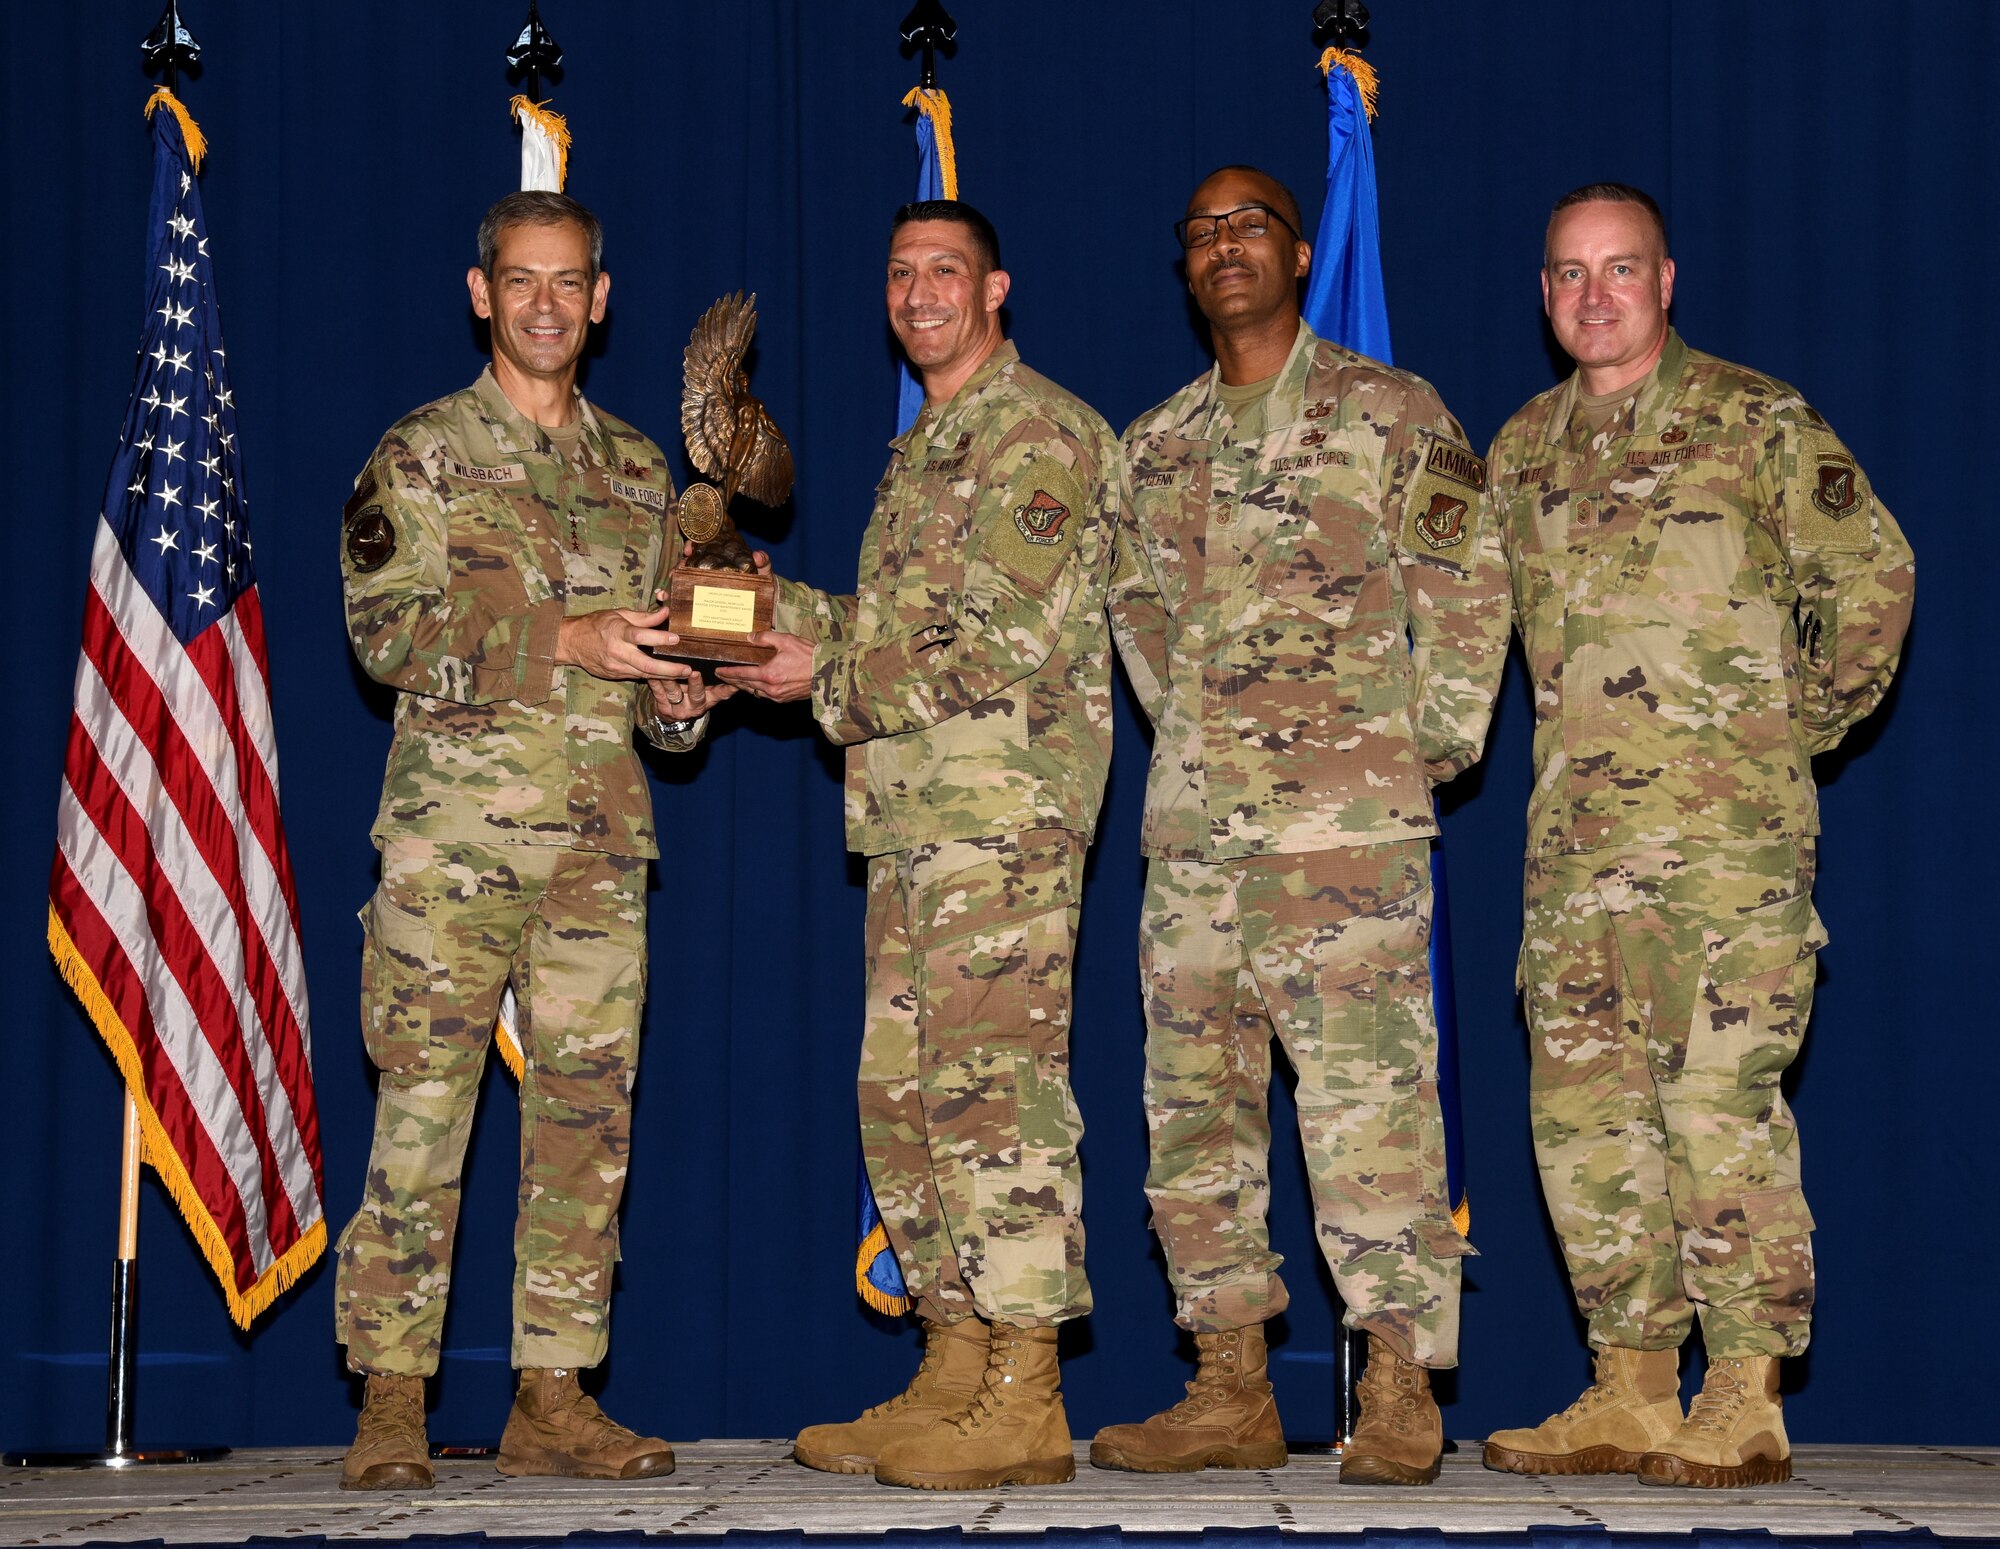 Service members receives a trophy and poses for a photo.